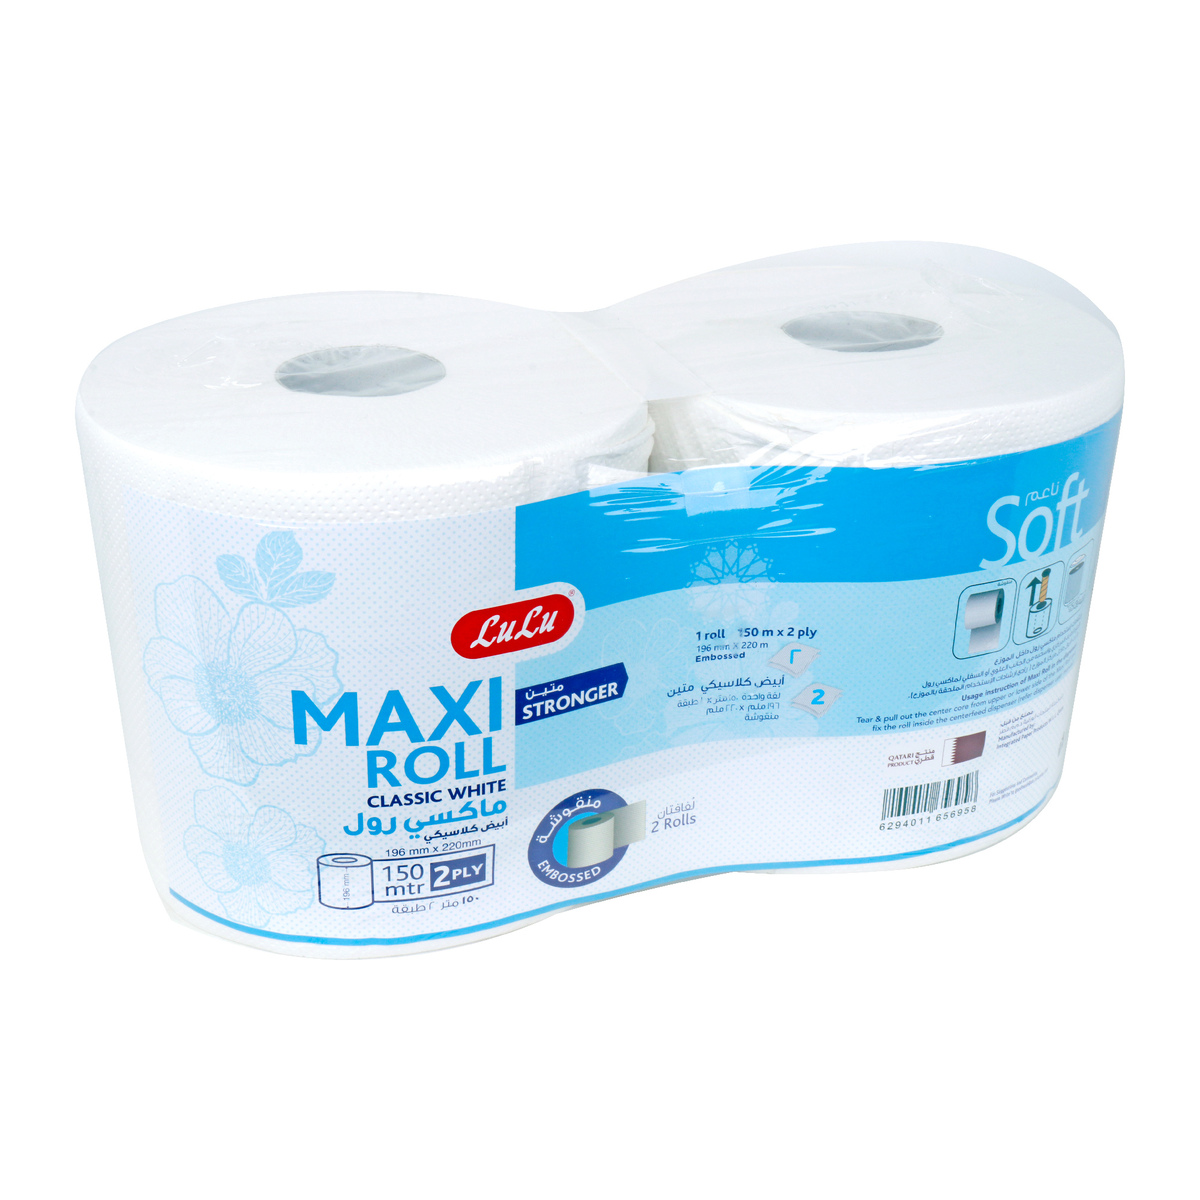 LuLu Embossed Maxi Roll Classic White 2ply 150 Meter 2 Rolls